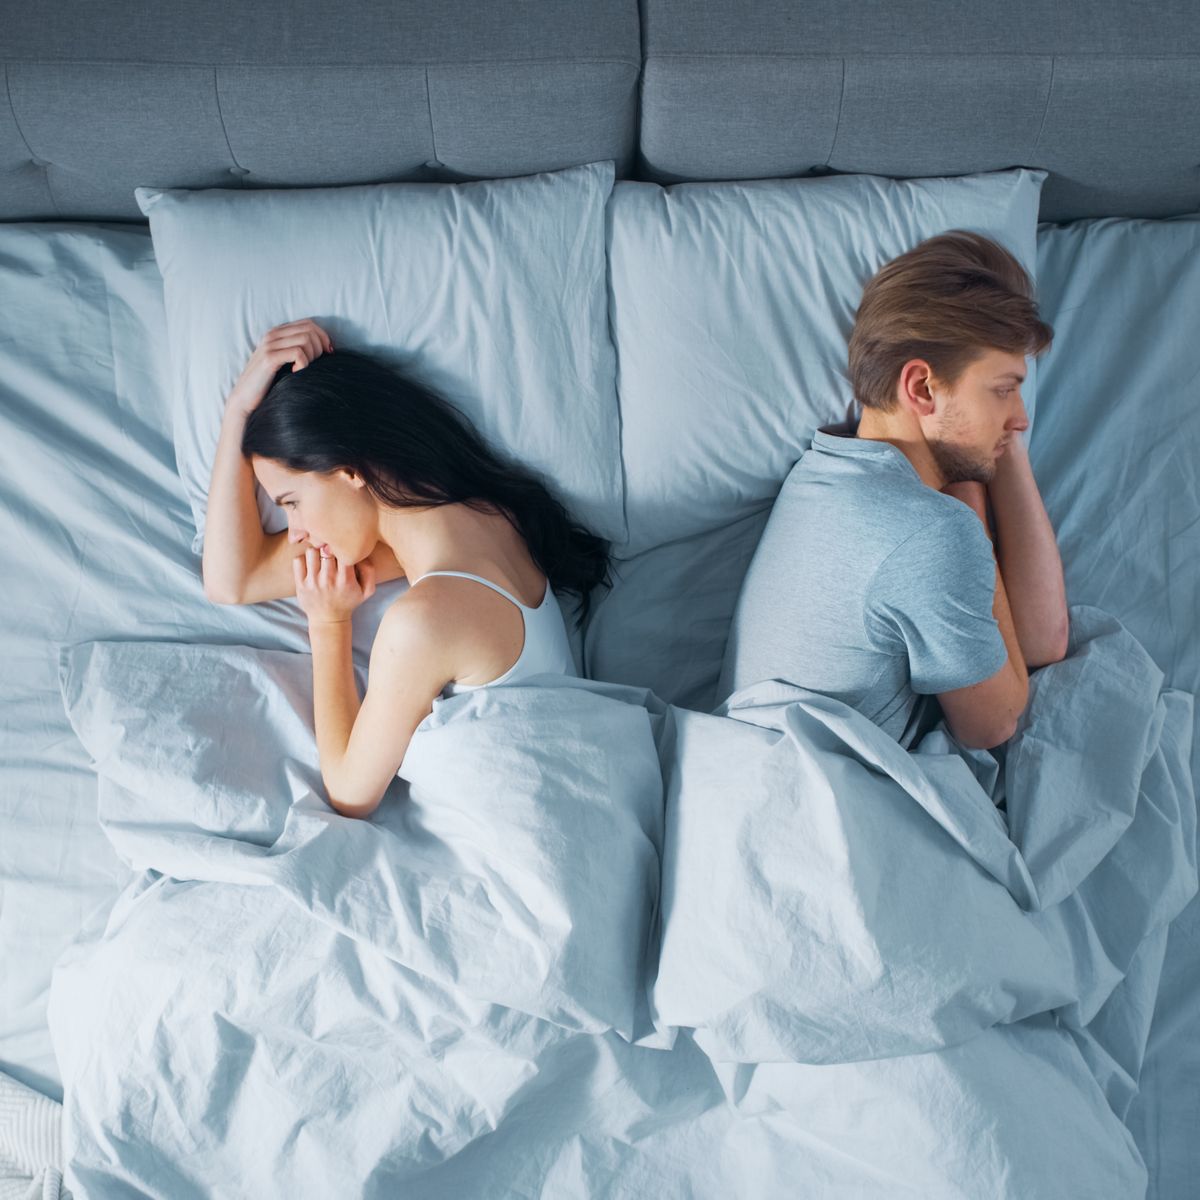 Sleeping Sex Chudai Bloud - What To Do When You're Sexually Frustrated In Your Relationship